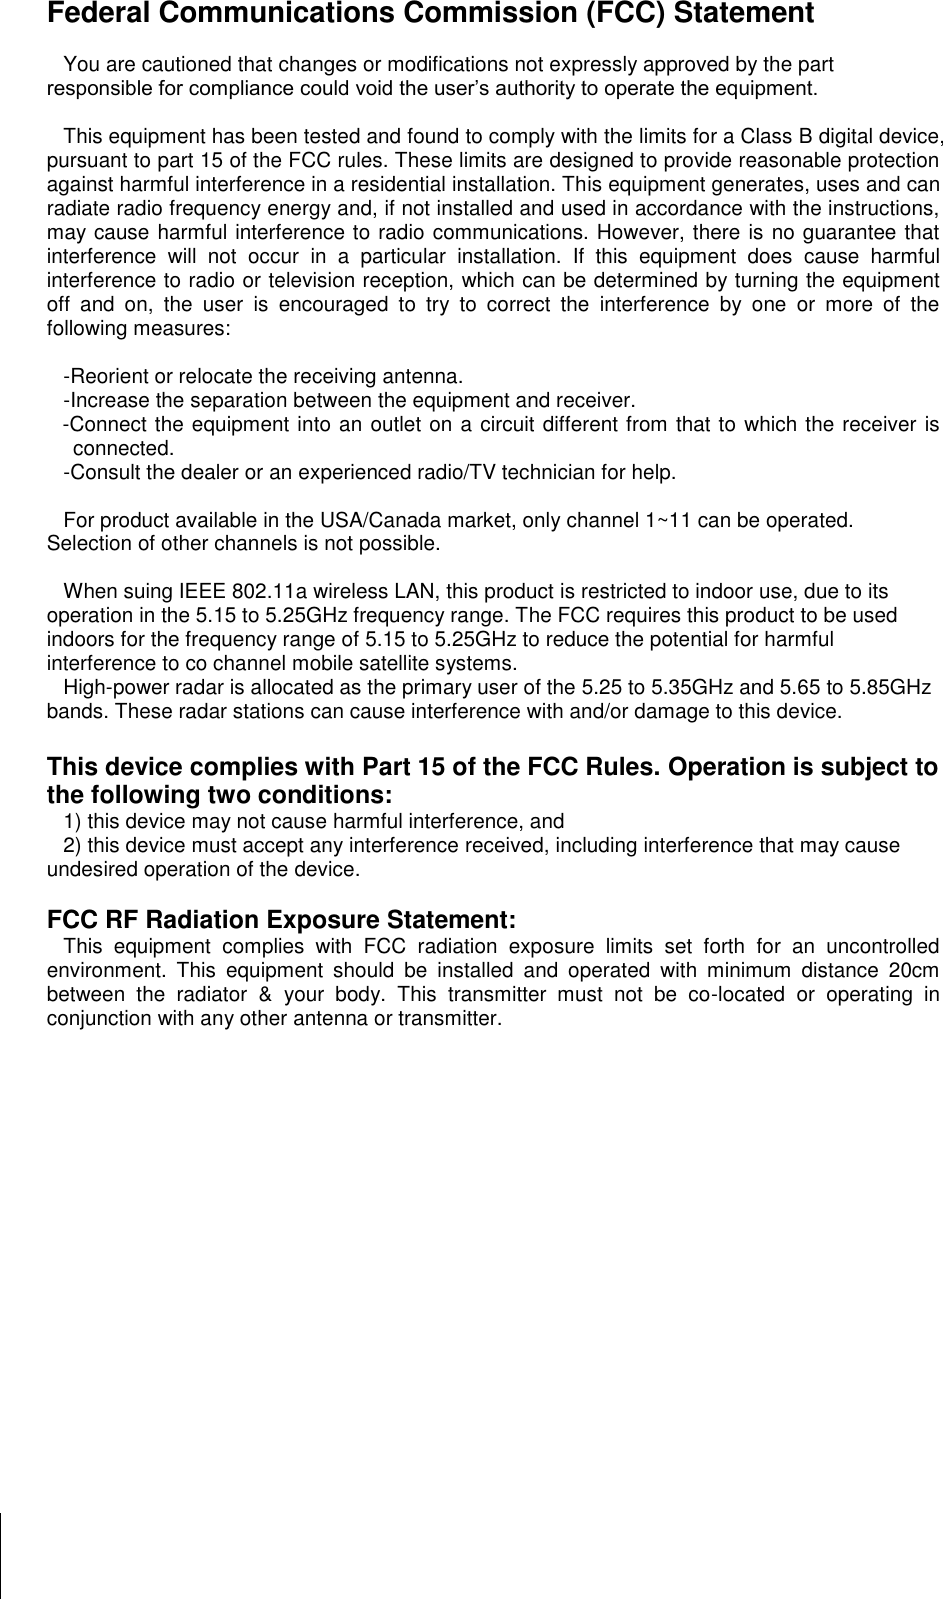        Federal Communications Commission (FCC) Statement  You are cautioned that changes or modifications not expressly approved by the part responsible for compliance could void the user’s authority to operate the equipment.  This equipment has been tested and found to comply with the limits for a Class B digital device, pursuant to part 15 of the FCC rules. These limits are designed to provide reasonable protection against harmful interference in a residential installation. This equipment generates, uses and can radiate radio frequency energy and, if not installed and used in accordance with the instructions, may cause harmful interference to radio communications. However, there is no guarantee that interference  will  not  occur  in  a  particular  installation.  If  this  equipment  does  cause  harmful interference to radio or television reception, which can be determined by turning the equipment off  and  on,  the  user  is  encouraged  to  try  to  correct  the  interference  by  one  or  more  of  the following measures:   -Reorient or relocate the receiving antenna. -Increase the separation between the equipment and receiver. -Connect the equipment into an outlet on a circuit different from that to which the receiver is connected. -Consult the dealer or an experienced radio/TV technician for help.  For product available in the USA/Canada market, only channel 1~11 can be operated. Selection of other channels is not possible.  When suing IEEE 802.11a wireless LAN, this product is restricted to indoor use, due to its operation in the 5.15 to 5.25GHz frequency range. The FCC requires this product to be used indoors for the frequency range of 5.15 to 5.25GHz to reduce the potential for harmful interference to co channel mobile satellite systems. High-power radar is allocated as the primary user of the 5.25 to 5.35GHz and 5.65 to 5.85GHz bands. These radar stations can cause interference with and/or damage to this device.  This device complies with Part 15 of the FCC Rules. Operation is subject to the following two conditions: 1) this device may not cause harmful interference, and 2) this device must accept any interference received, including interference that may cause undesired operation of the device.  FCC RF Radiation Exposure Statement: This  equipment  complies  with  FCC  radiation  exposure  limits  set  forth  for  an  uncontrolled environment.  This  equipment  should  be  installed  and  operated  with  minimum  distance  20cm between  the  radiator  &amp;  your  body.  This  transmitter  must  not  be  co-located  or  operating  in conjunction with any other antenna or transmitter. 